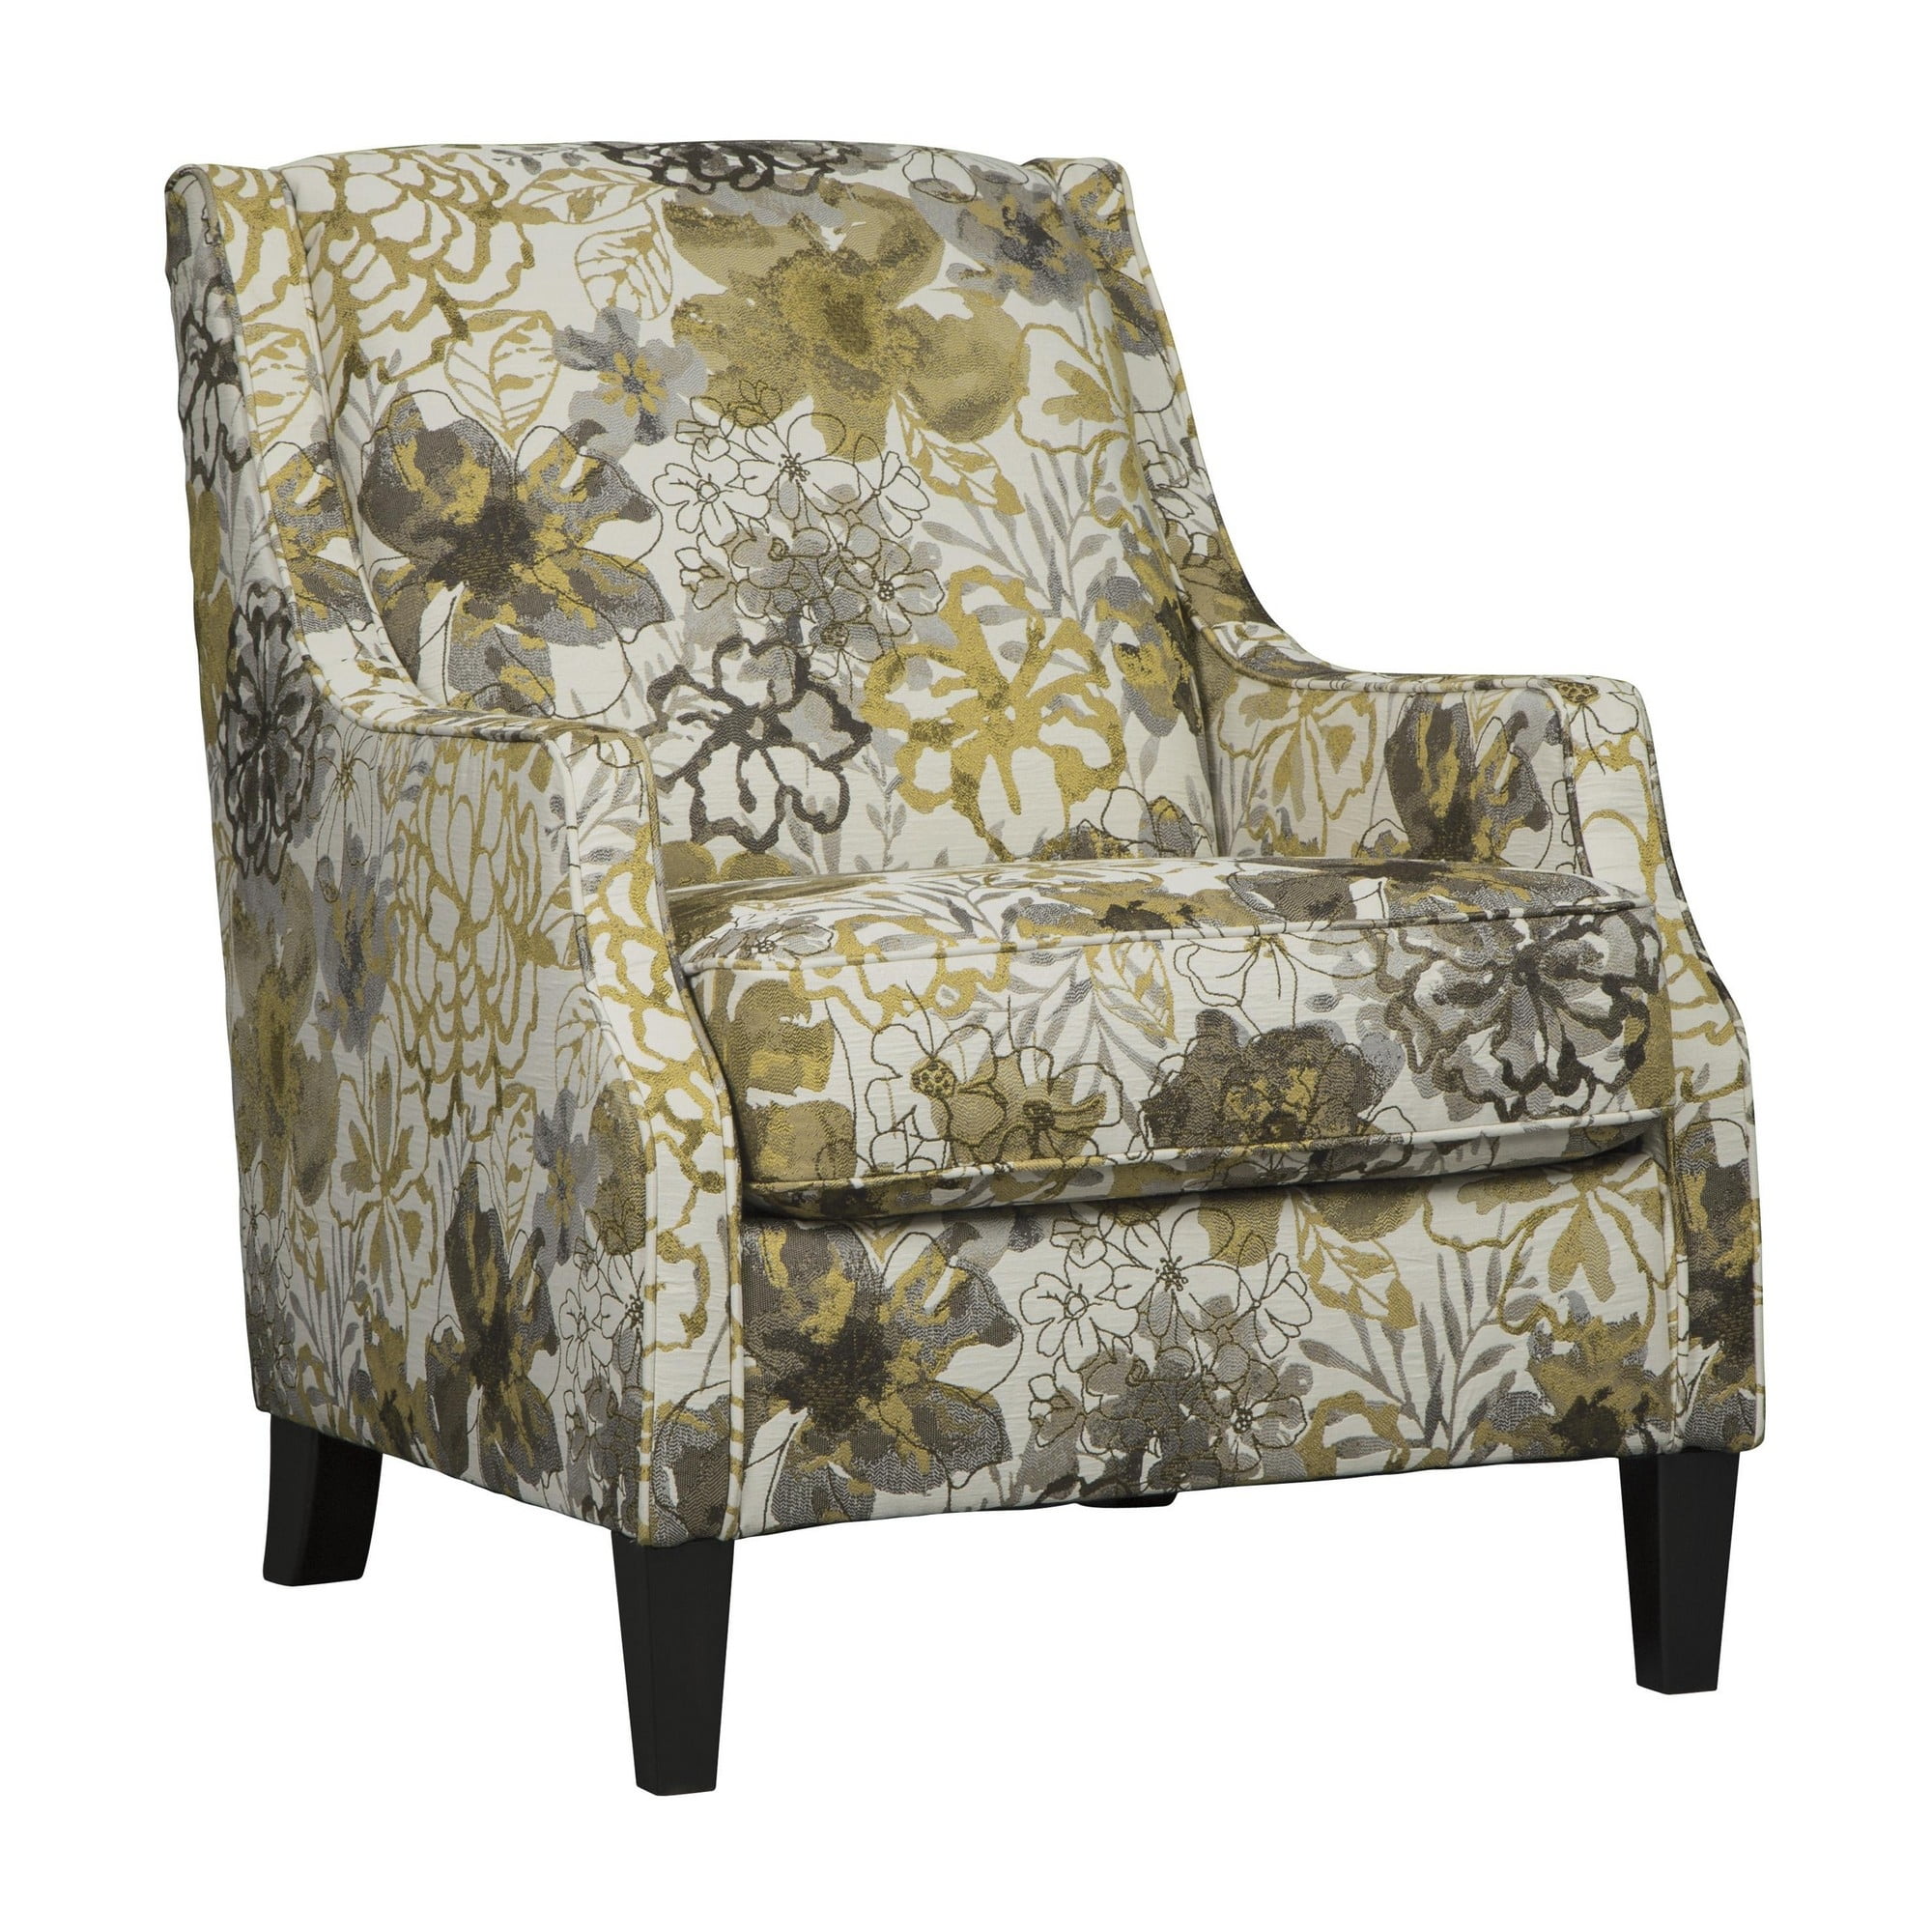 Fabric Upholstered Wooden Accent Chair with Floral Print, Black and